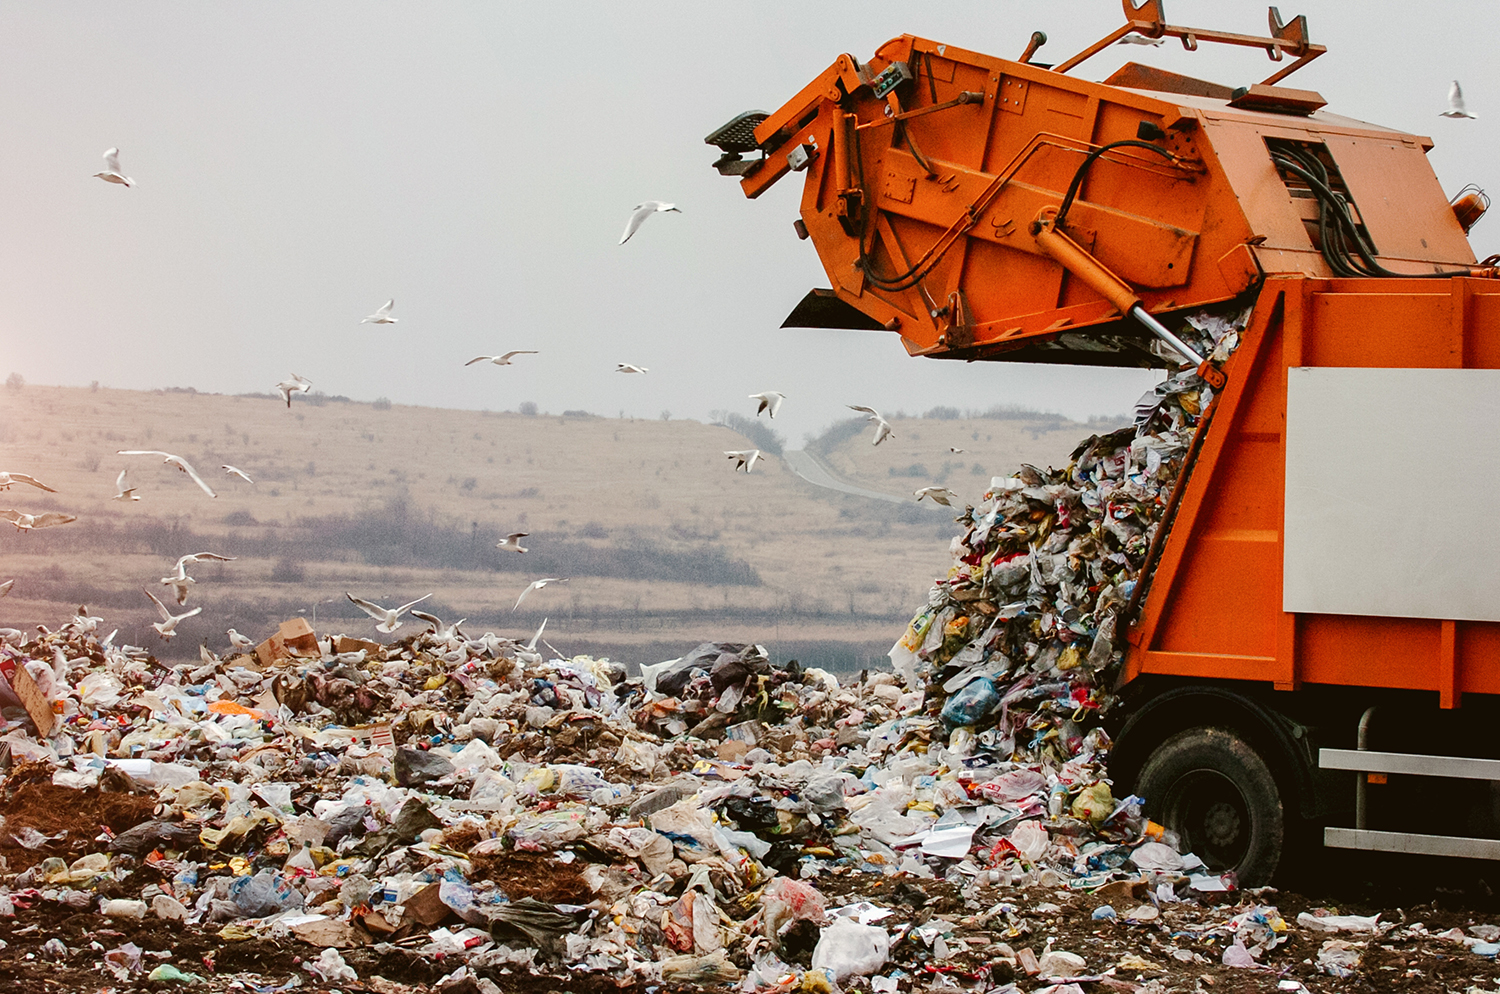 An image of a landfill area 